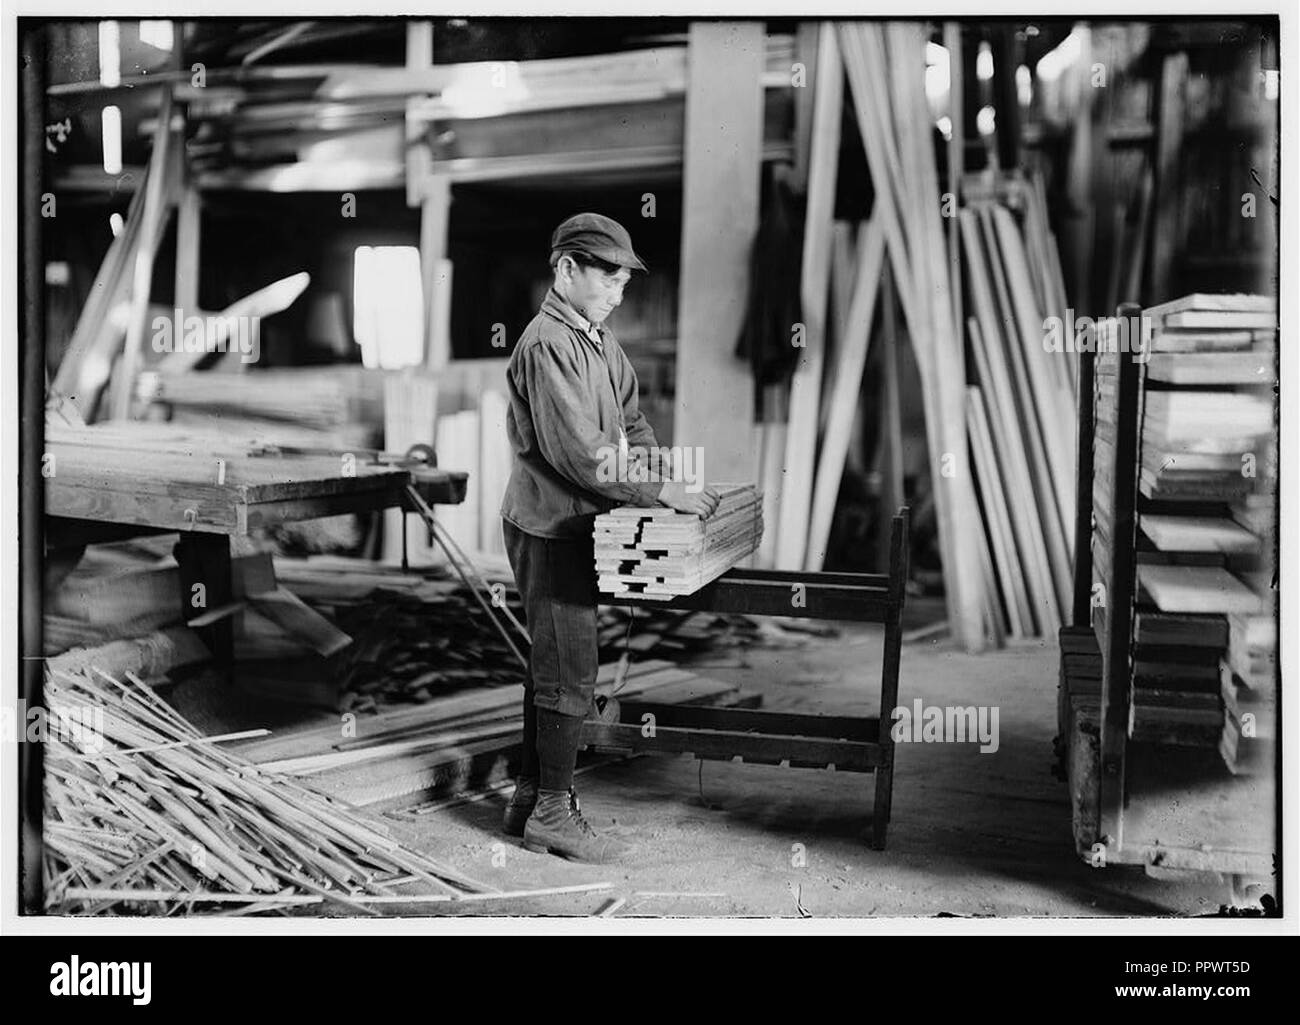 Boy probably about 13 years old, tying strips which he has taken away from the planer. Schultze Waltum Co., Planing Mill. Stock Photo